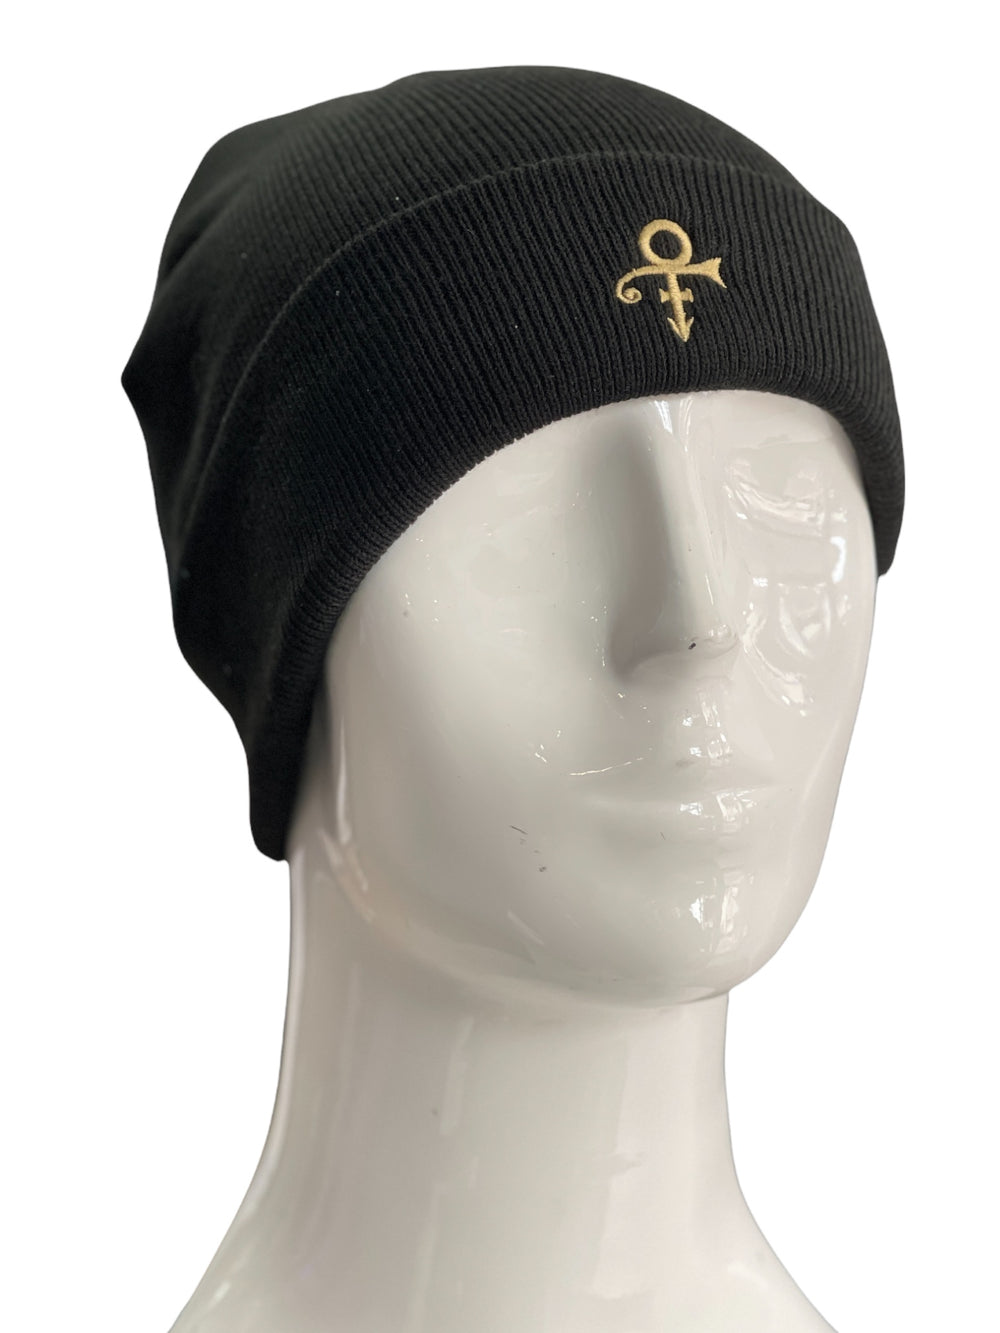 Prince – Love Symbol Turn Up Beanie Hat Gold Thread Embroidery Official & Xclusive